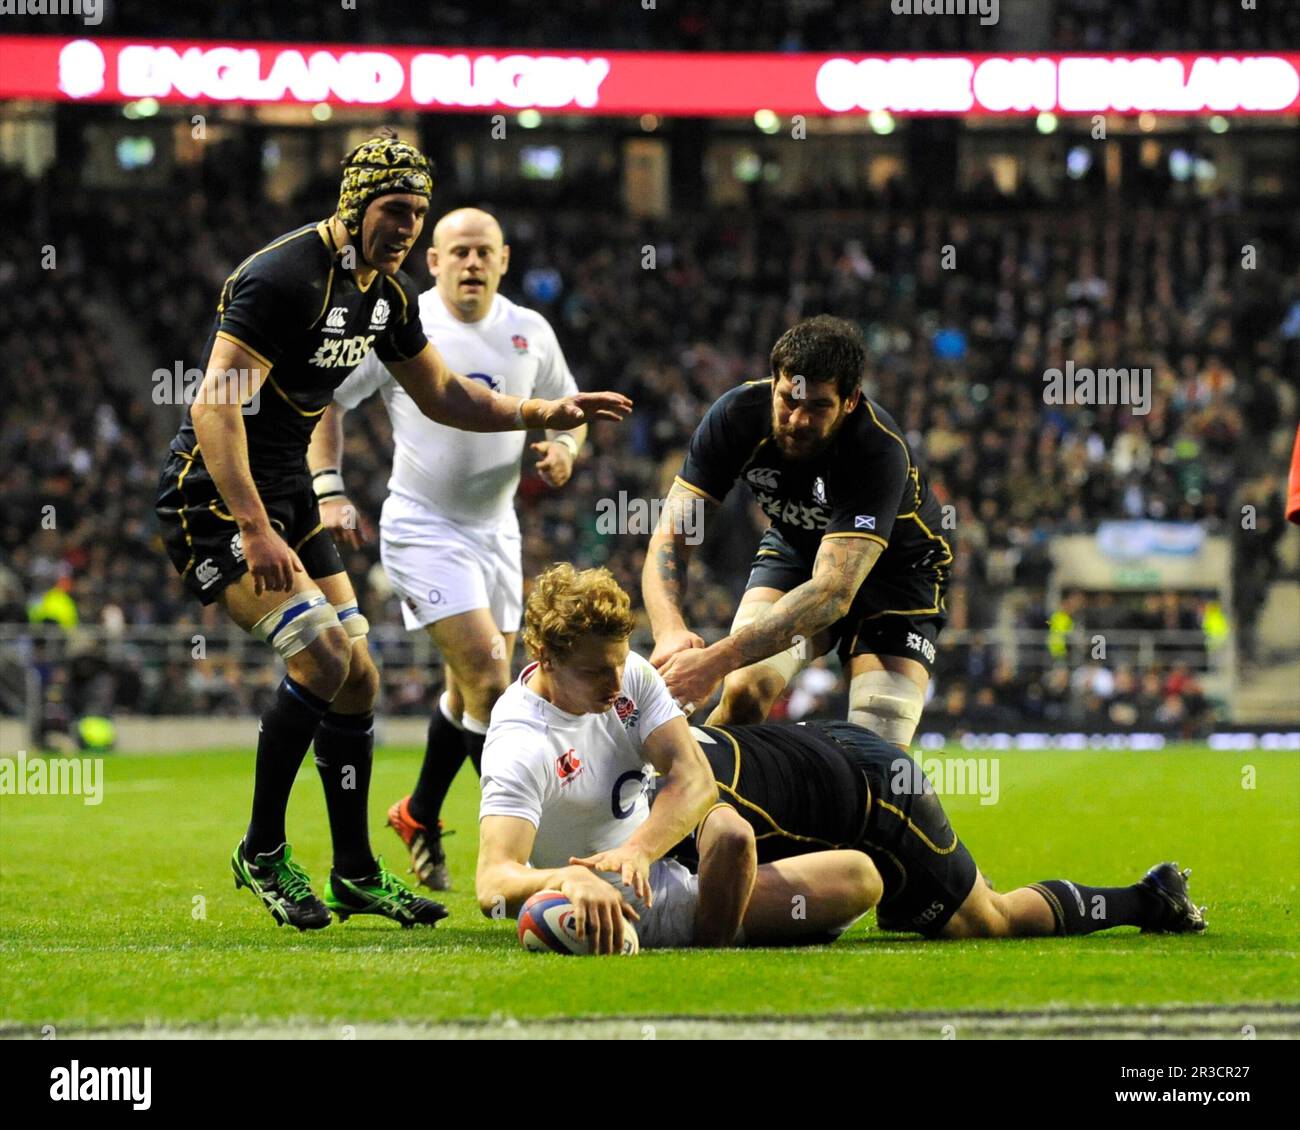 Billy Twelvetrees of England dives over to score a try on his debut during the RBS 6 Nations match between England and Scotland at Twickenham on Satur Stock Photo